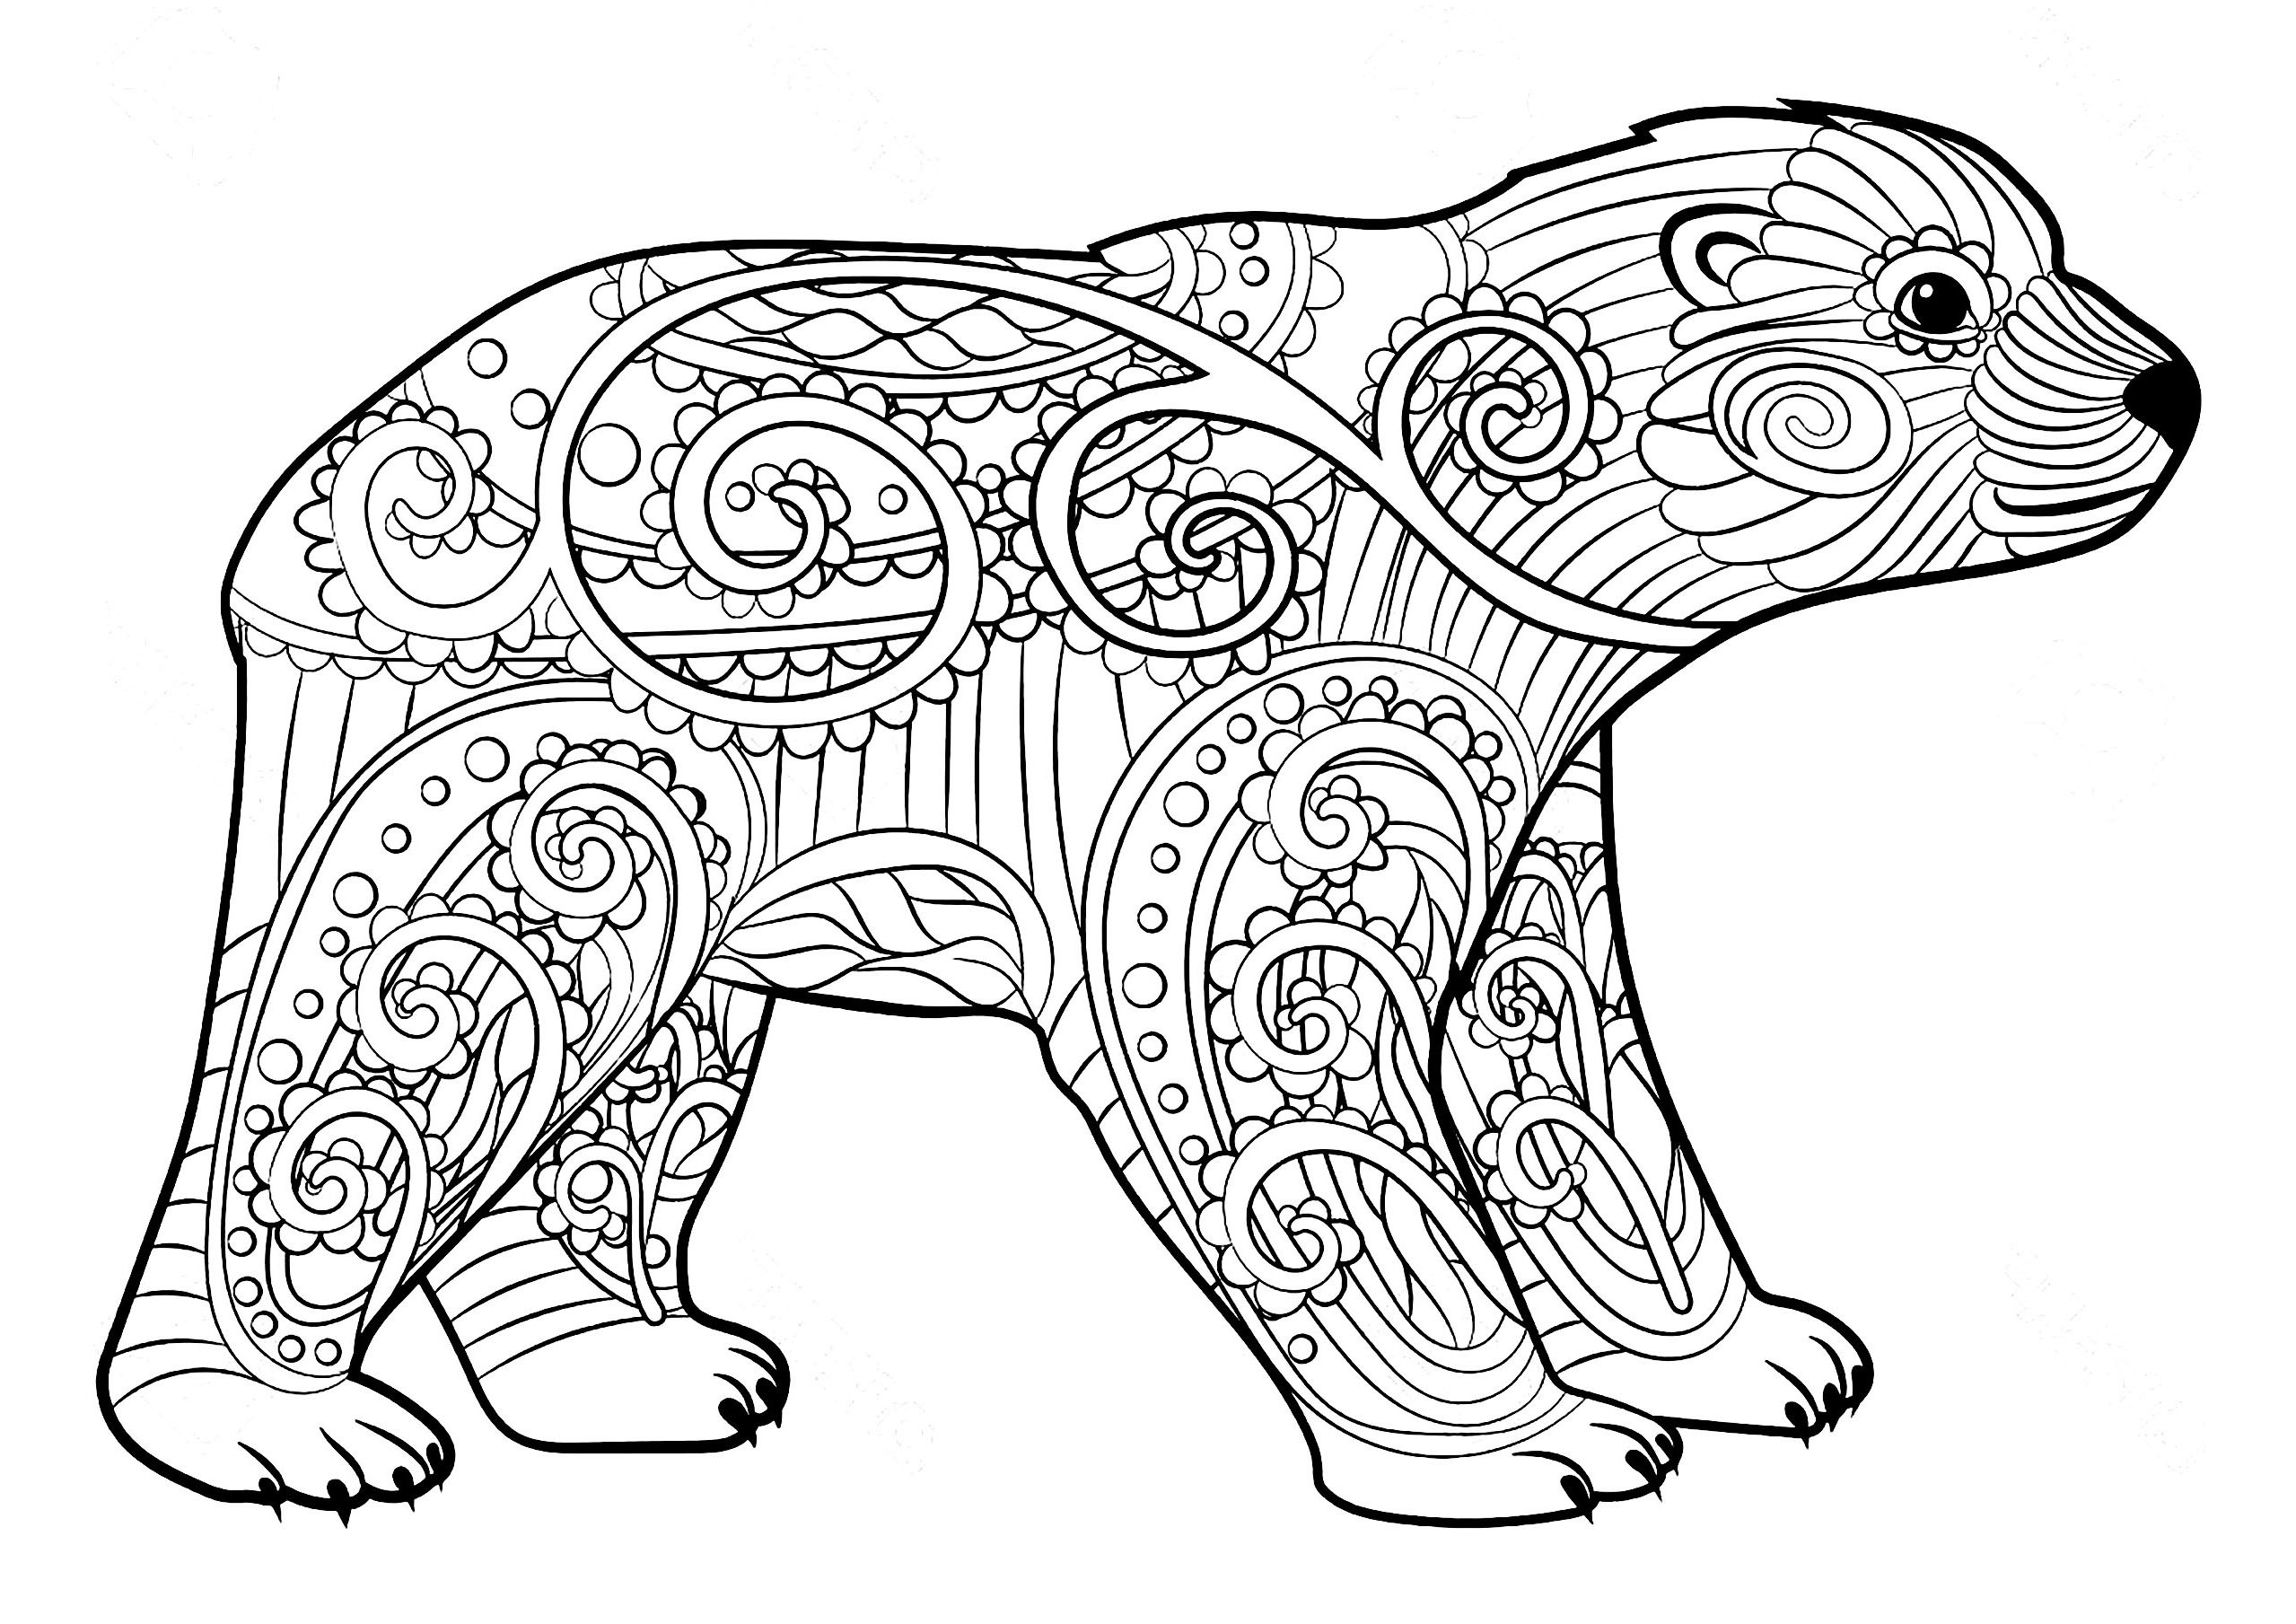 Bear Coloring Pages For Kids
 Bears to color for kids Bears Kids Coloring Pages